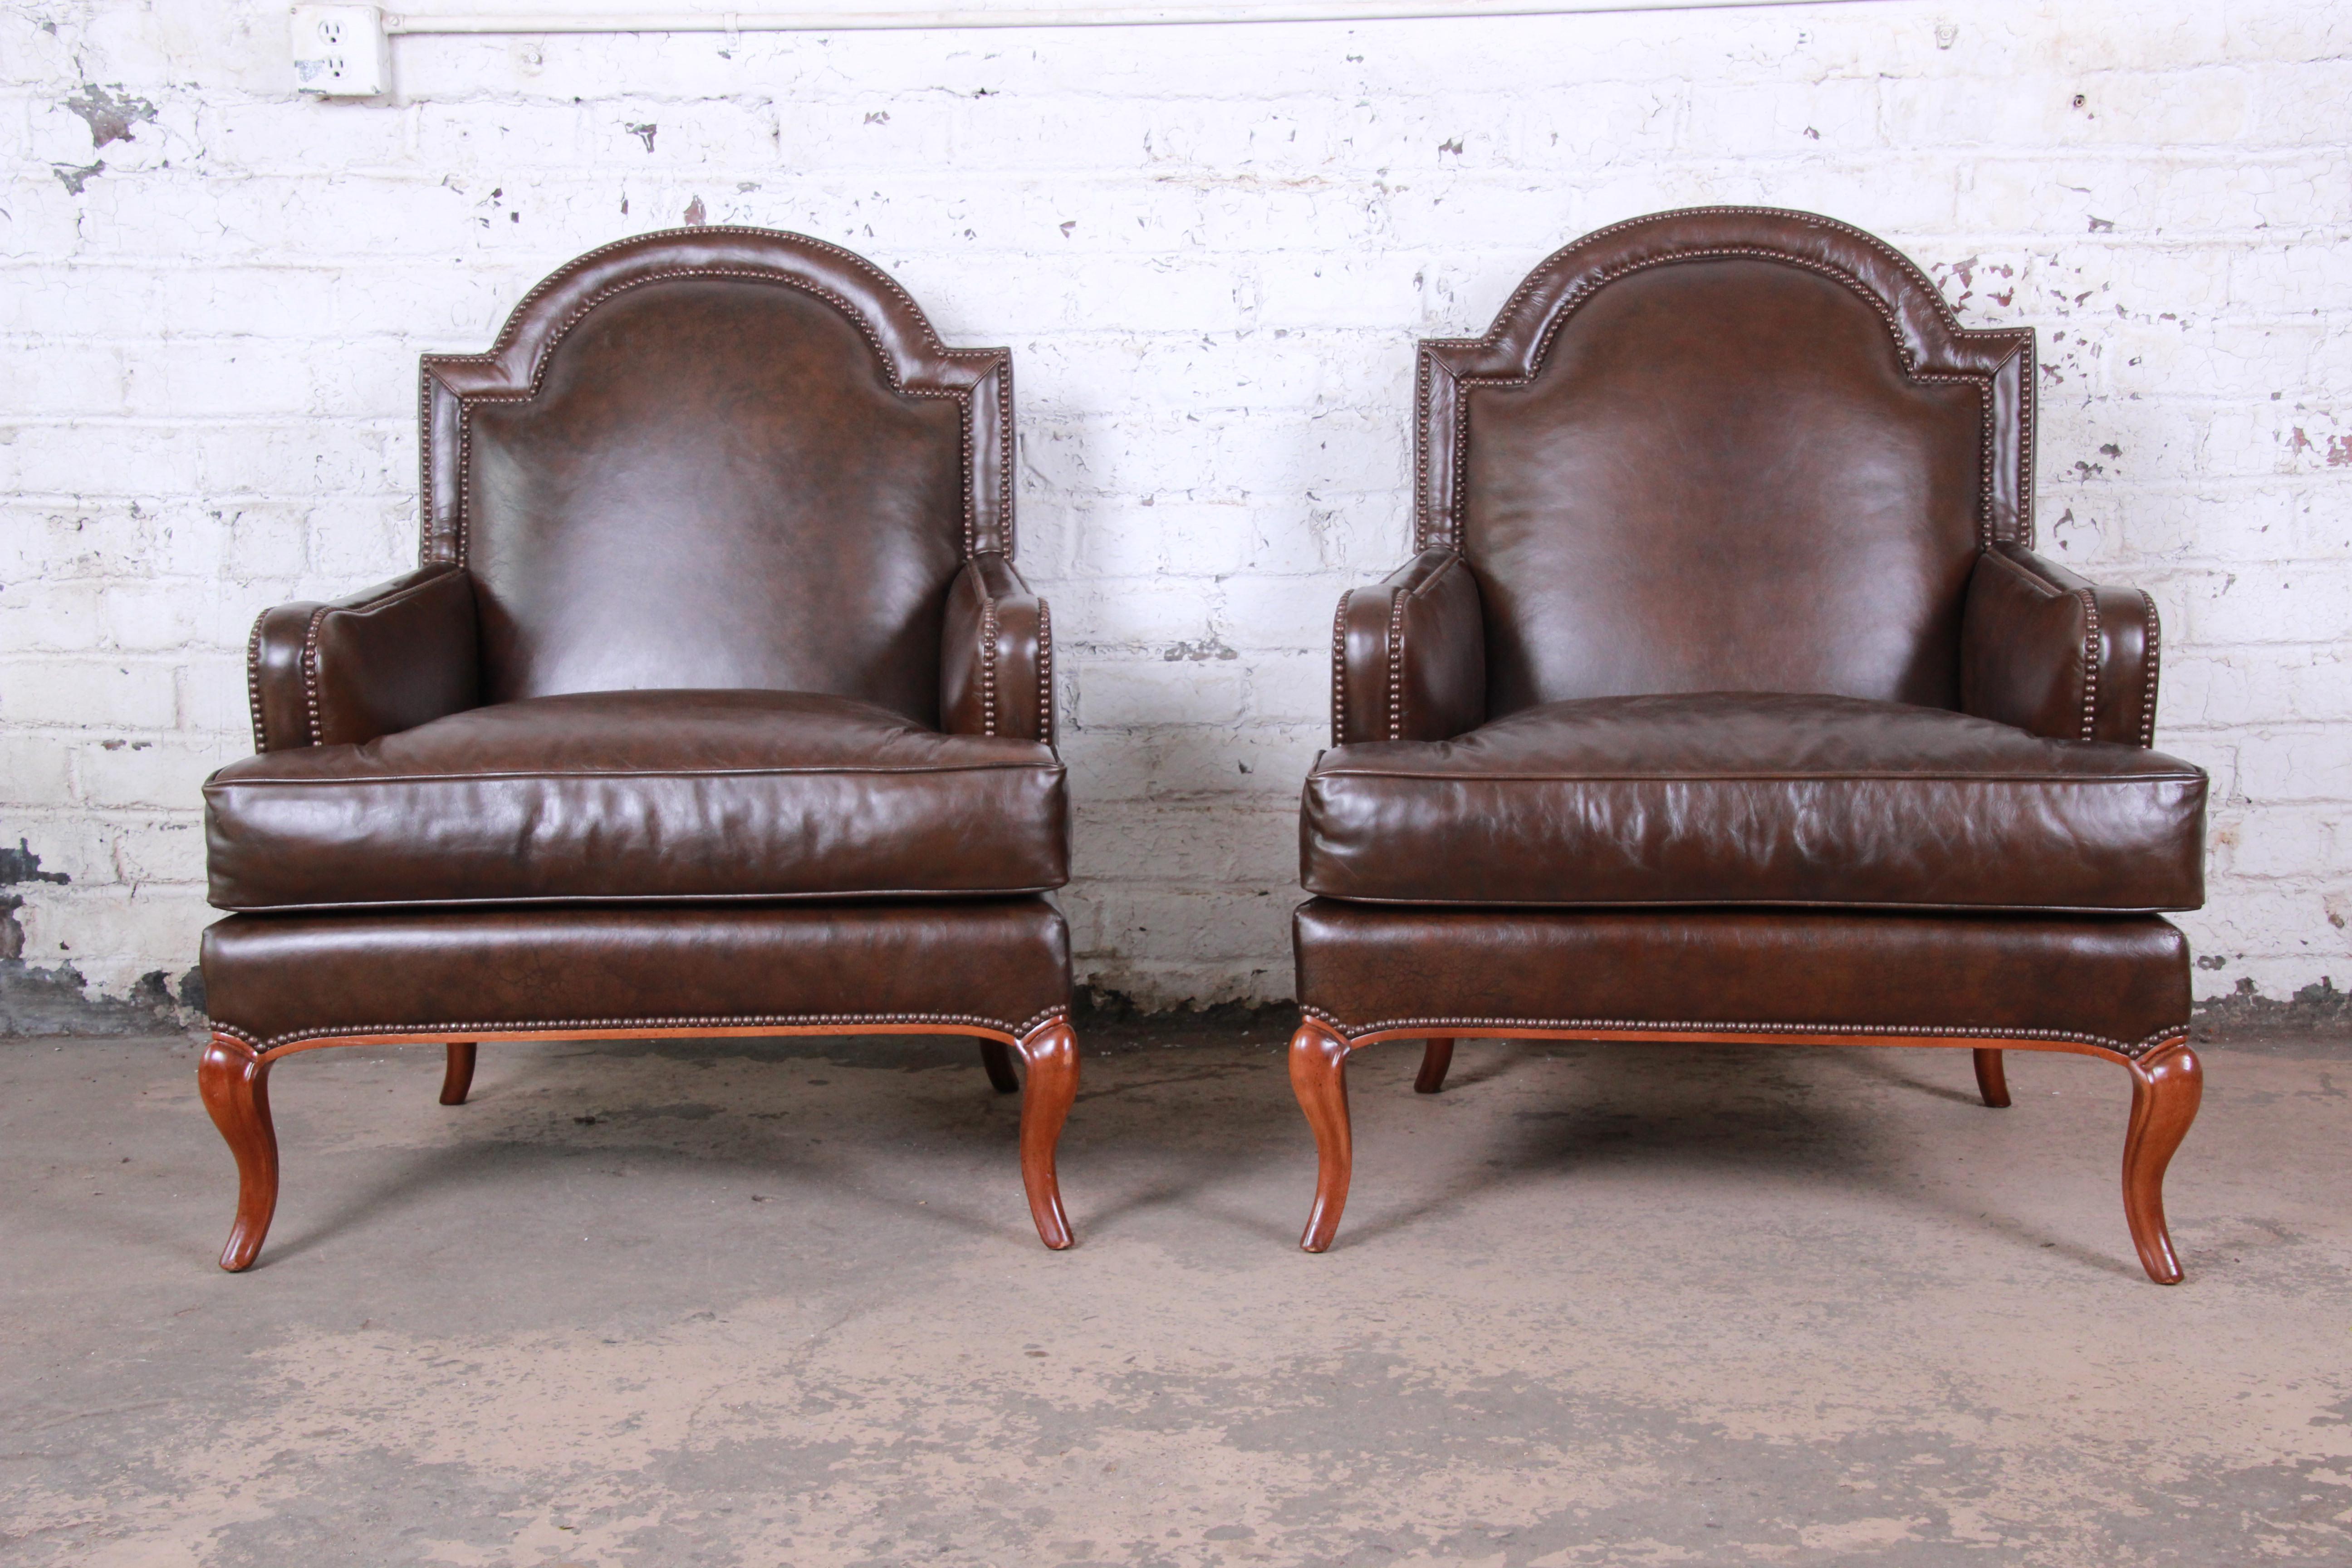 An exceptional pair of leather lounge or club chairs by Baker Furniture. The chairs feature gorgeous high-end studded brown leather, with cabriole legs. They have a nice patina and are extremely comfortable. The original Baker label is present on